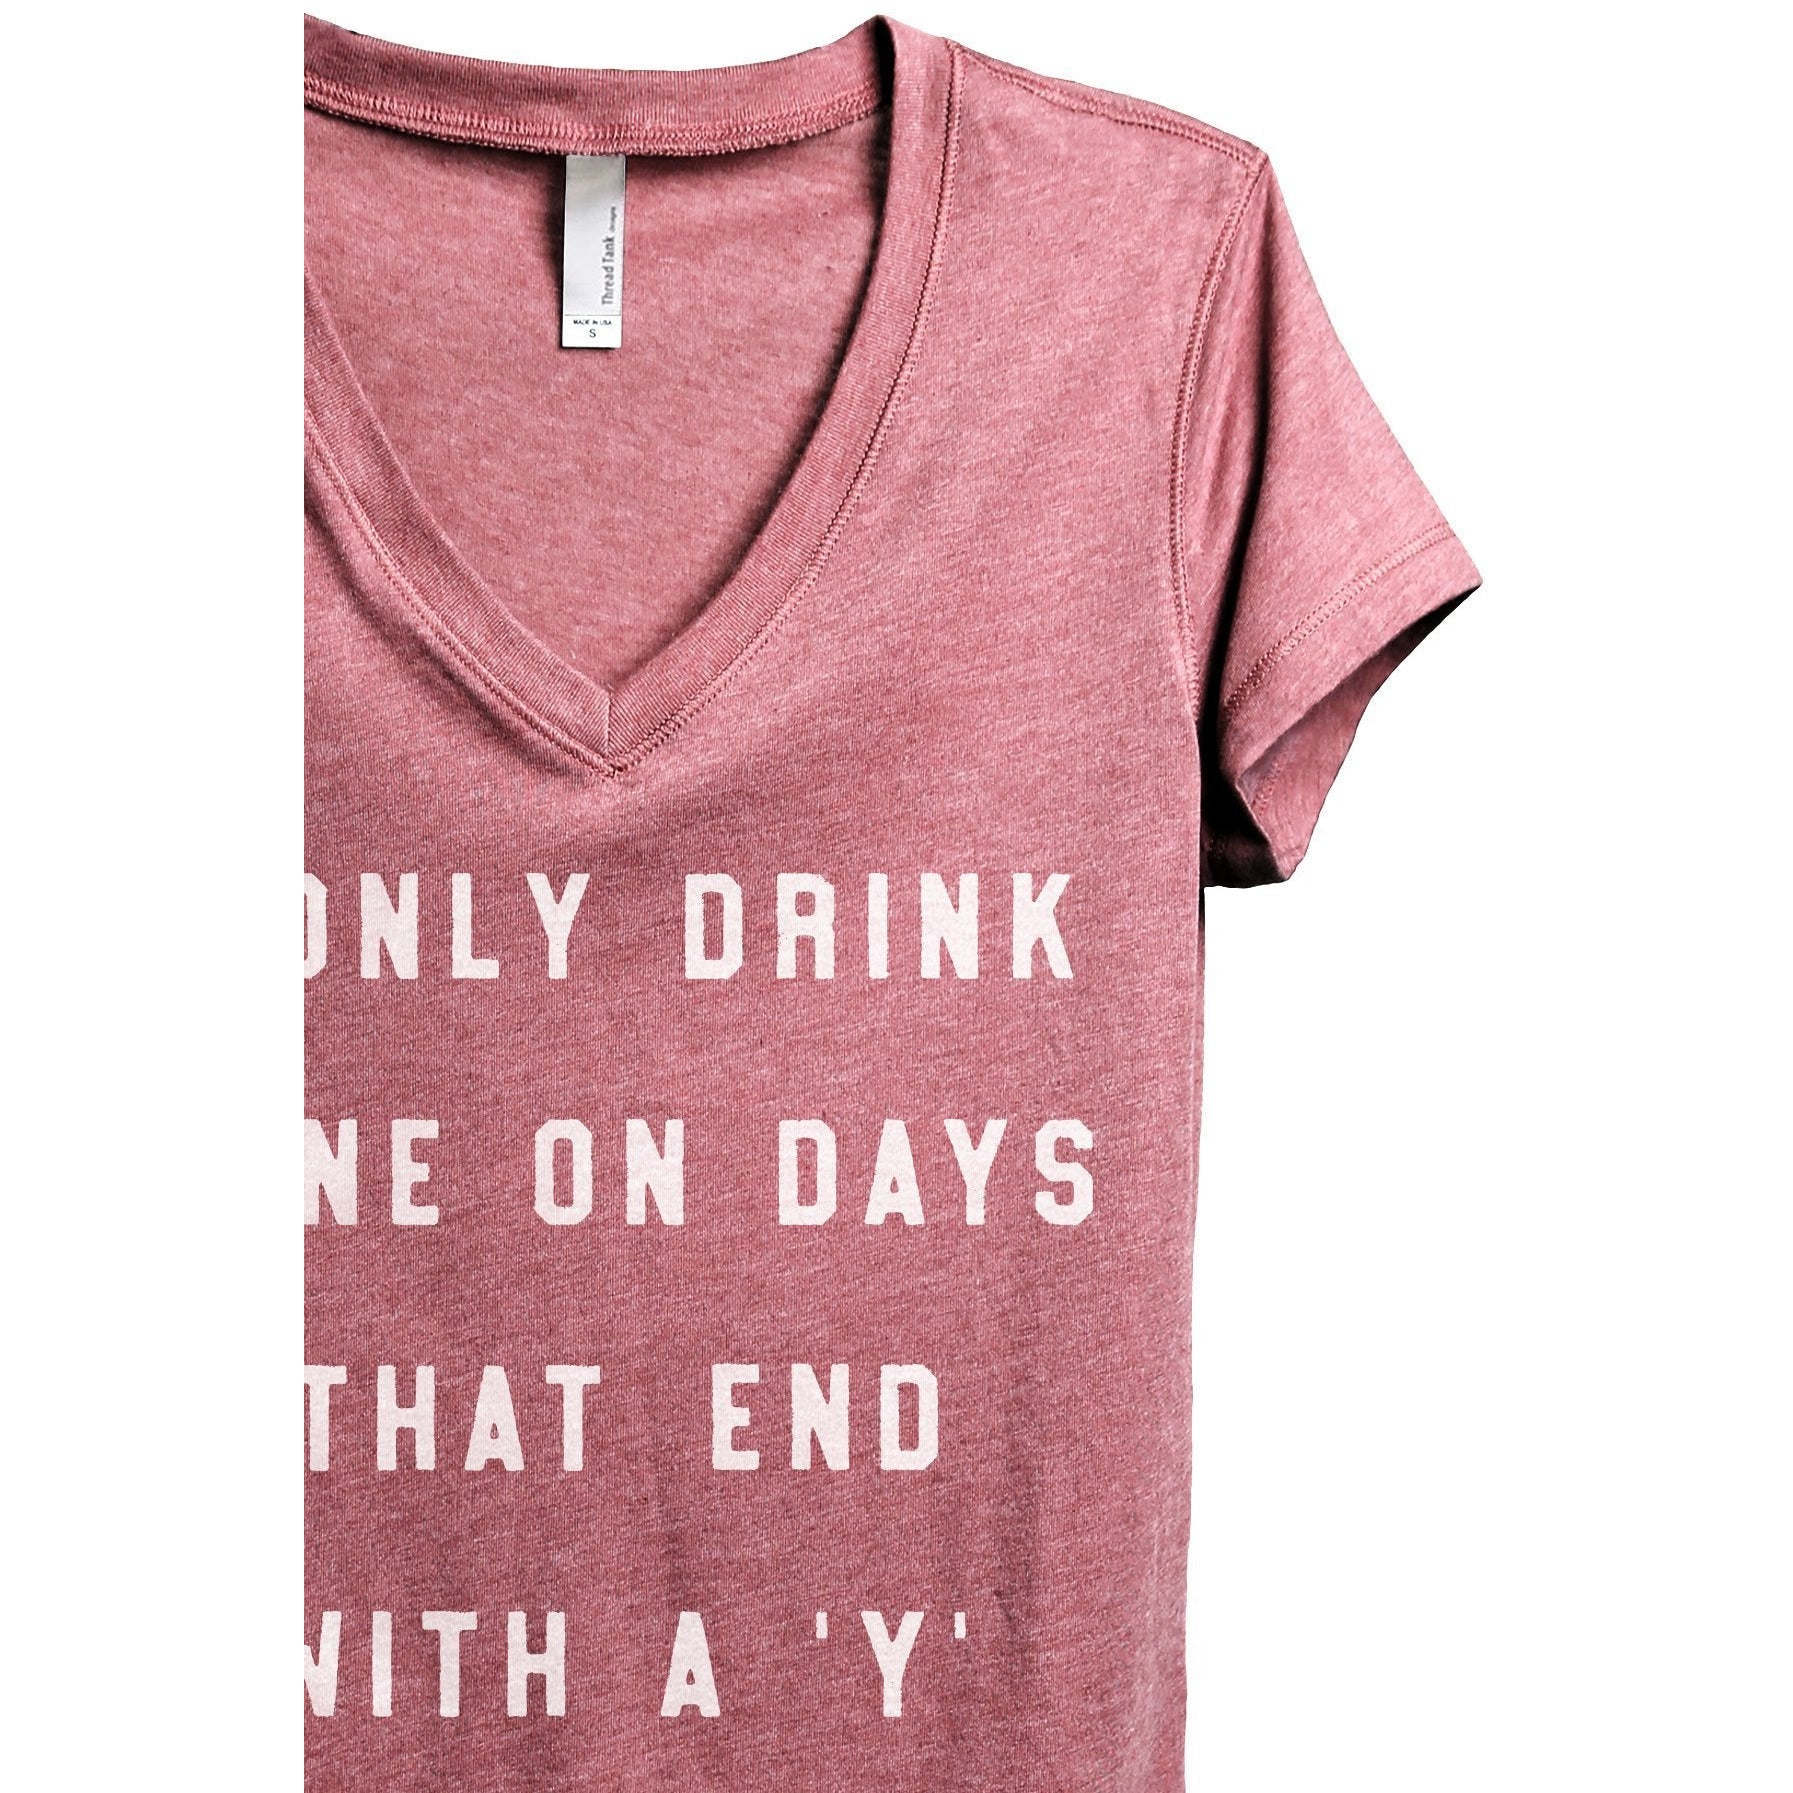 Drink Wine On Days Ends With Y Women's Relaxed Crewneck T-Shirt Top Tee Heather Rouge Zoom Details
